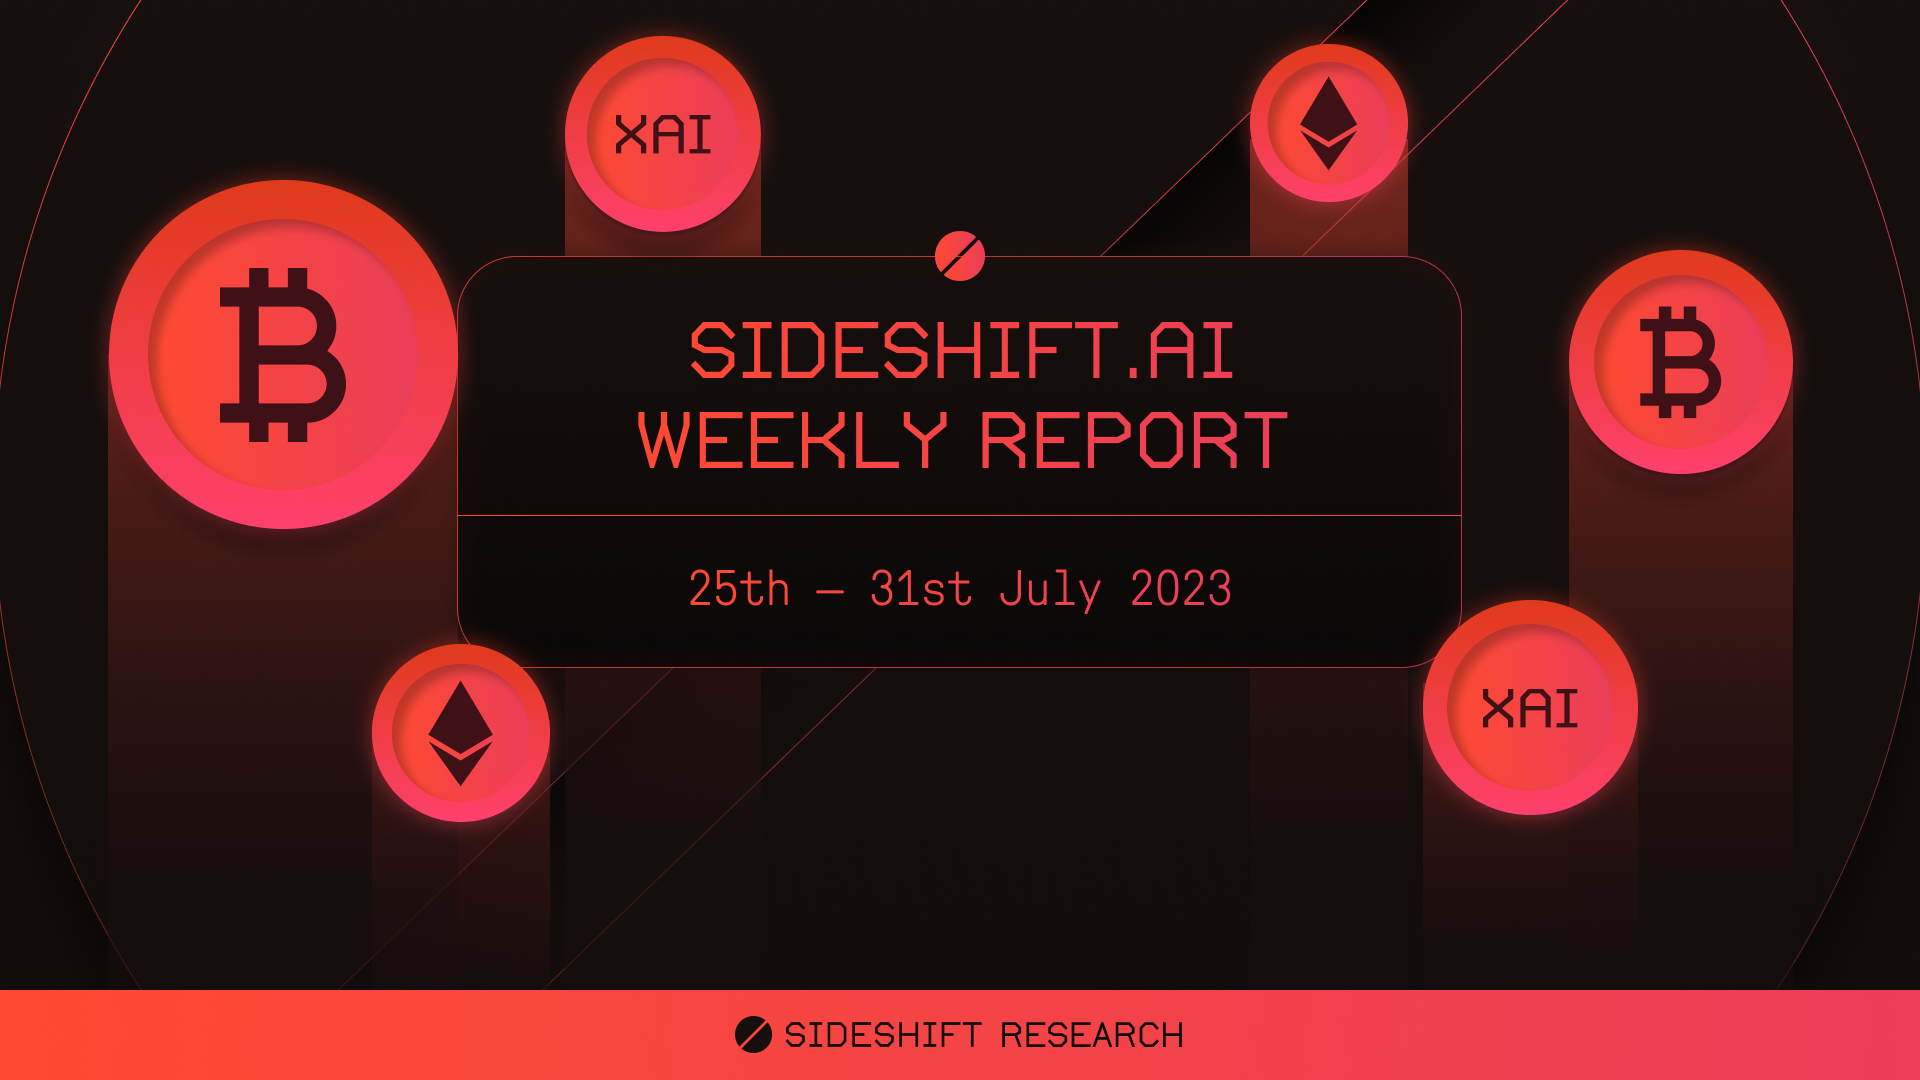 SideShift.ai Weekly Report | 25th - 31st July 2023